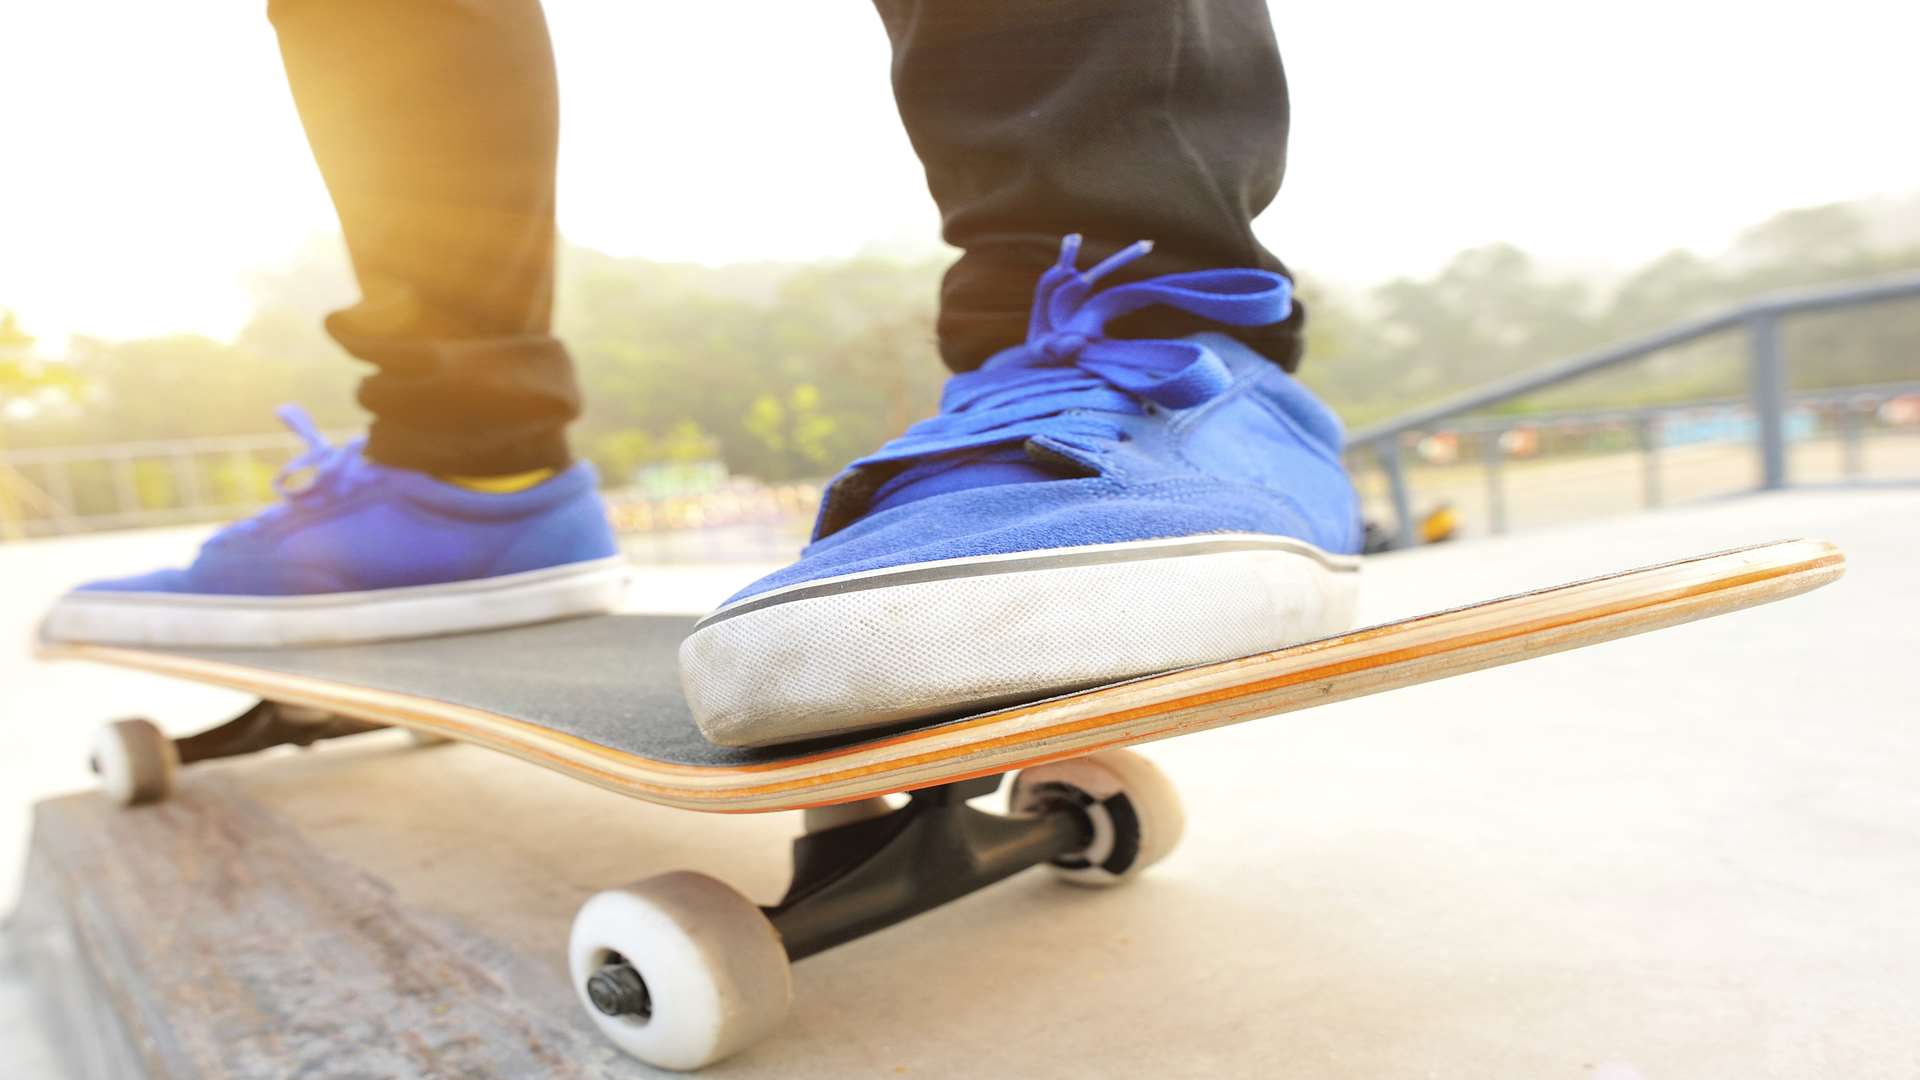 A new skate park is planned in Aylesham